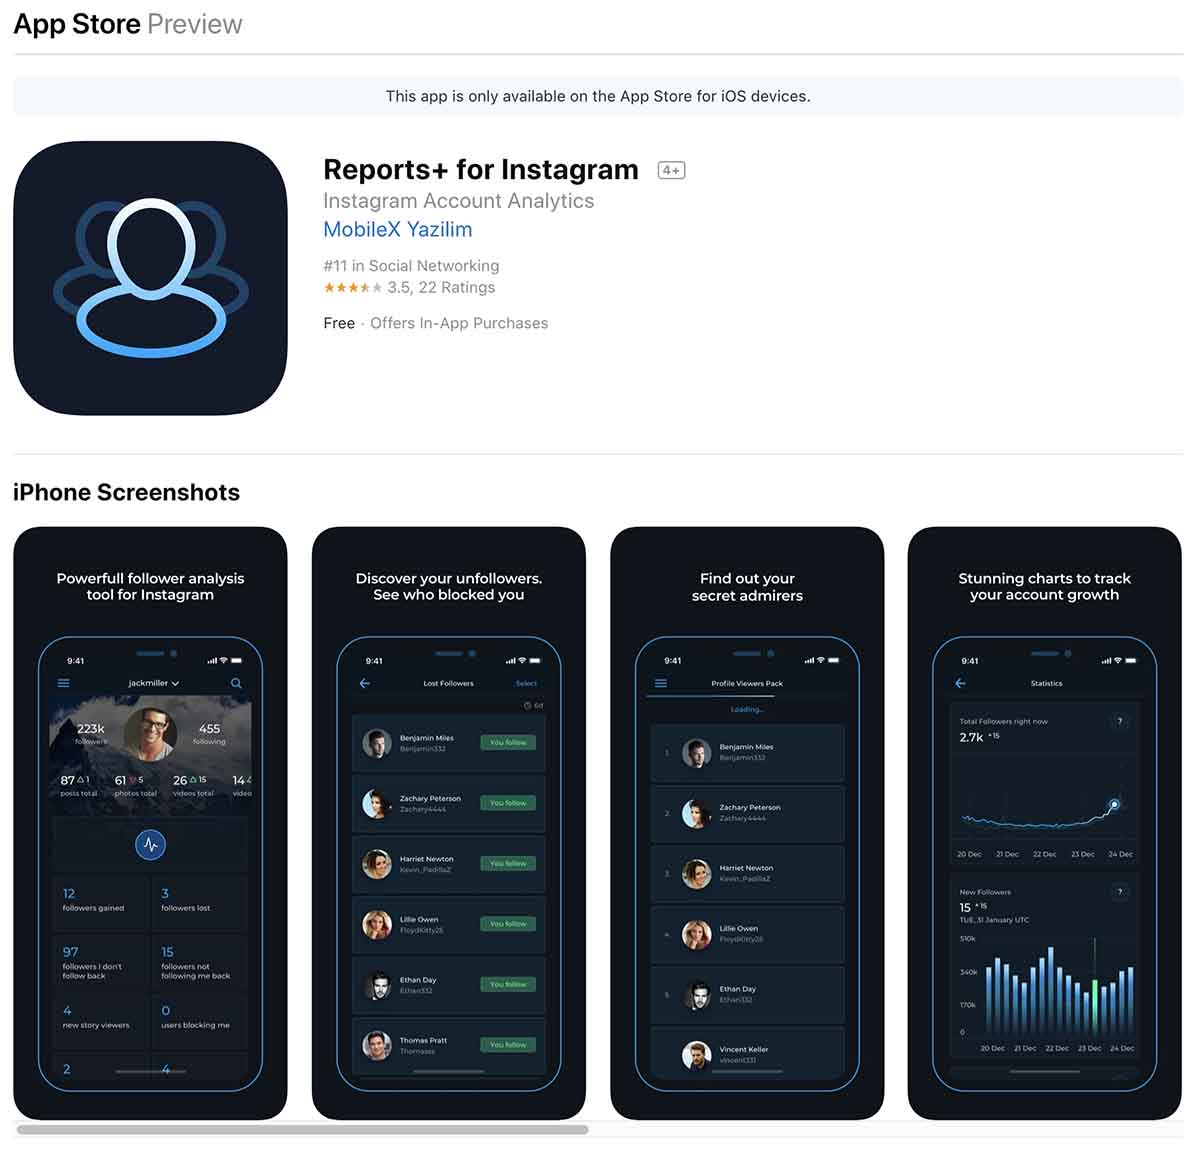 Screenshot of Reports+ for Instagram on the App Store